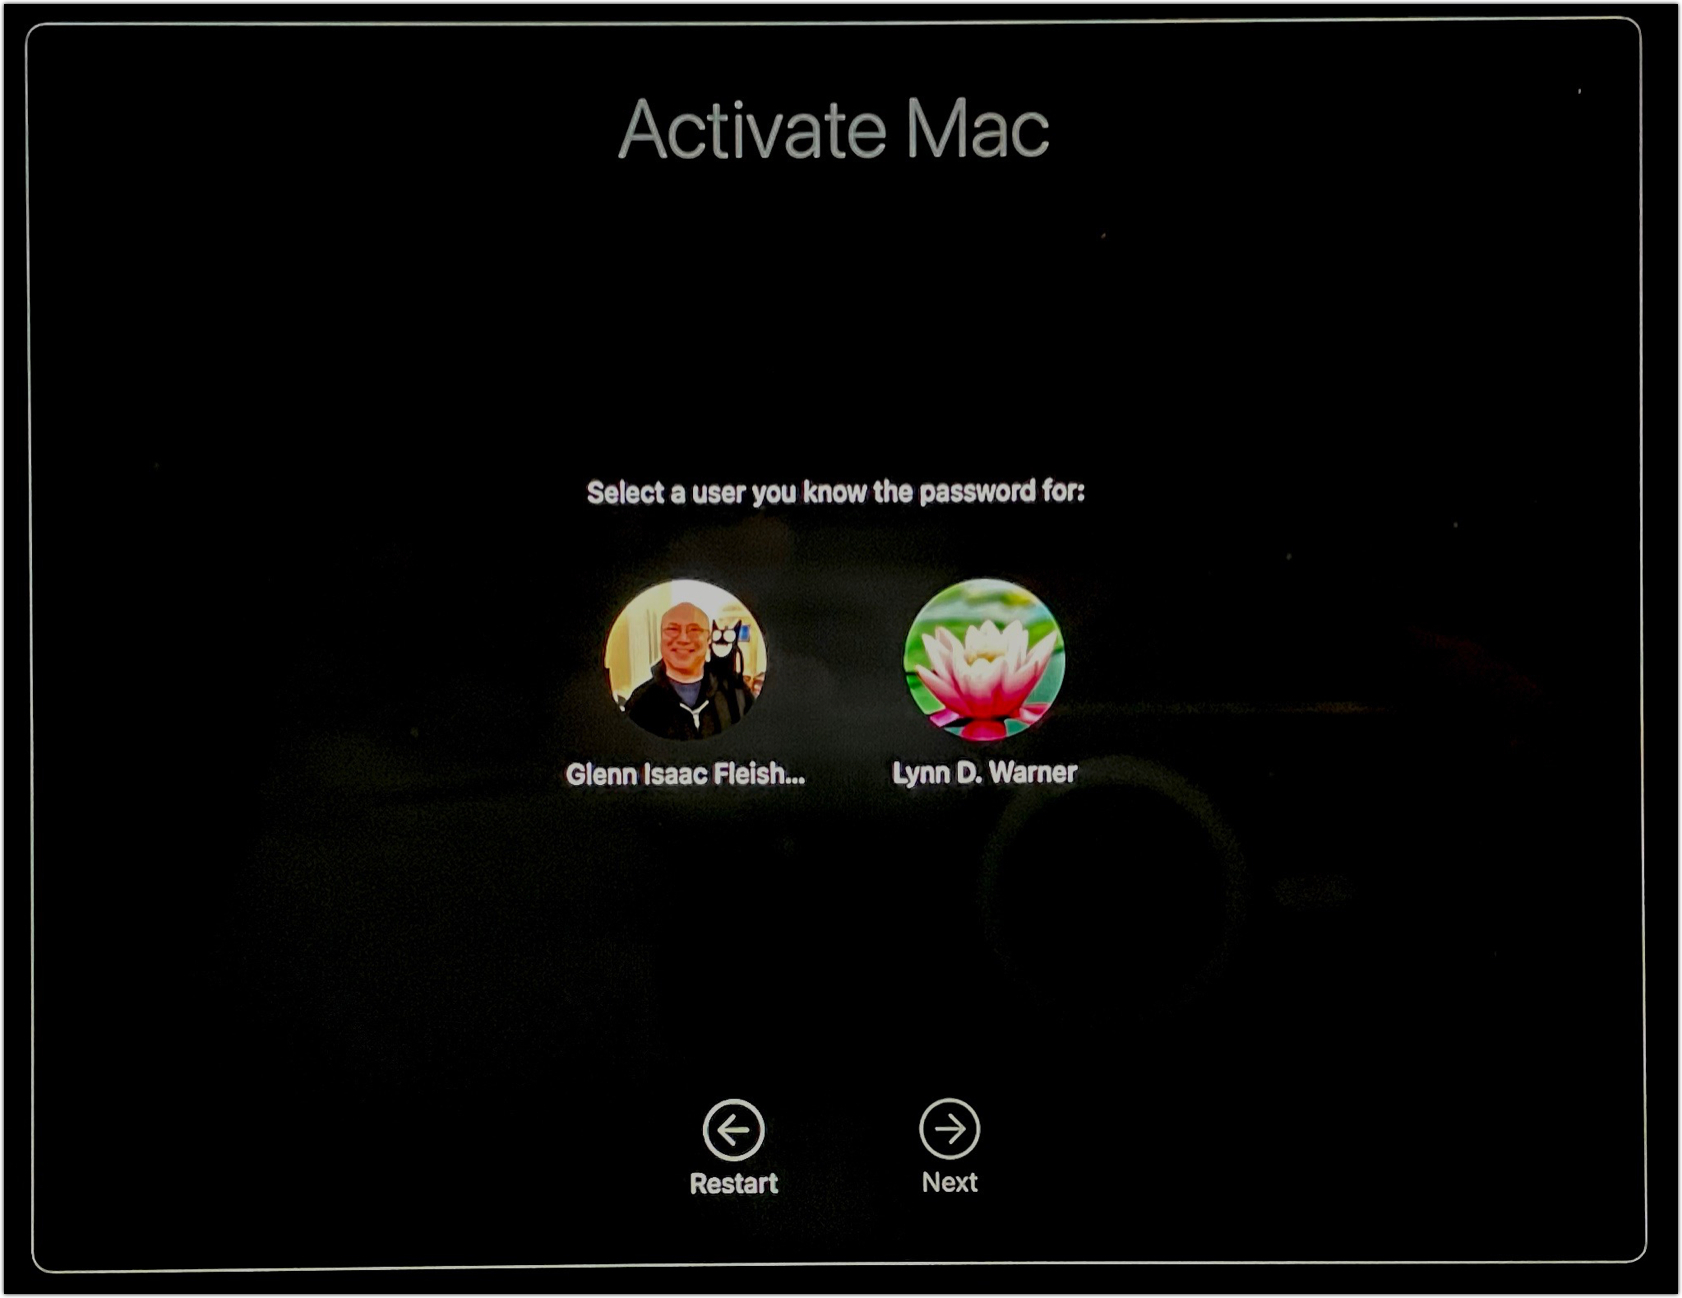 Figure 52: Activate your Mac by selecting a user and clicking Next.